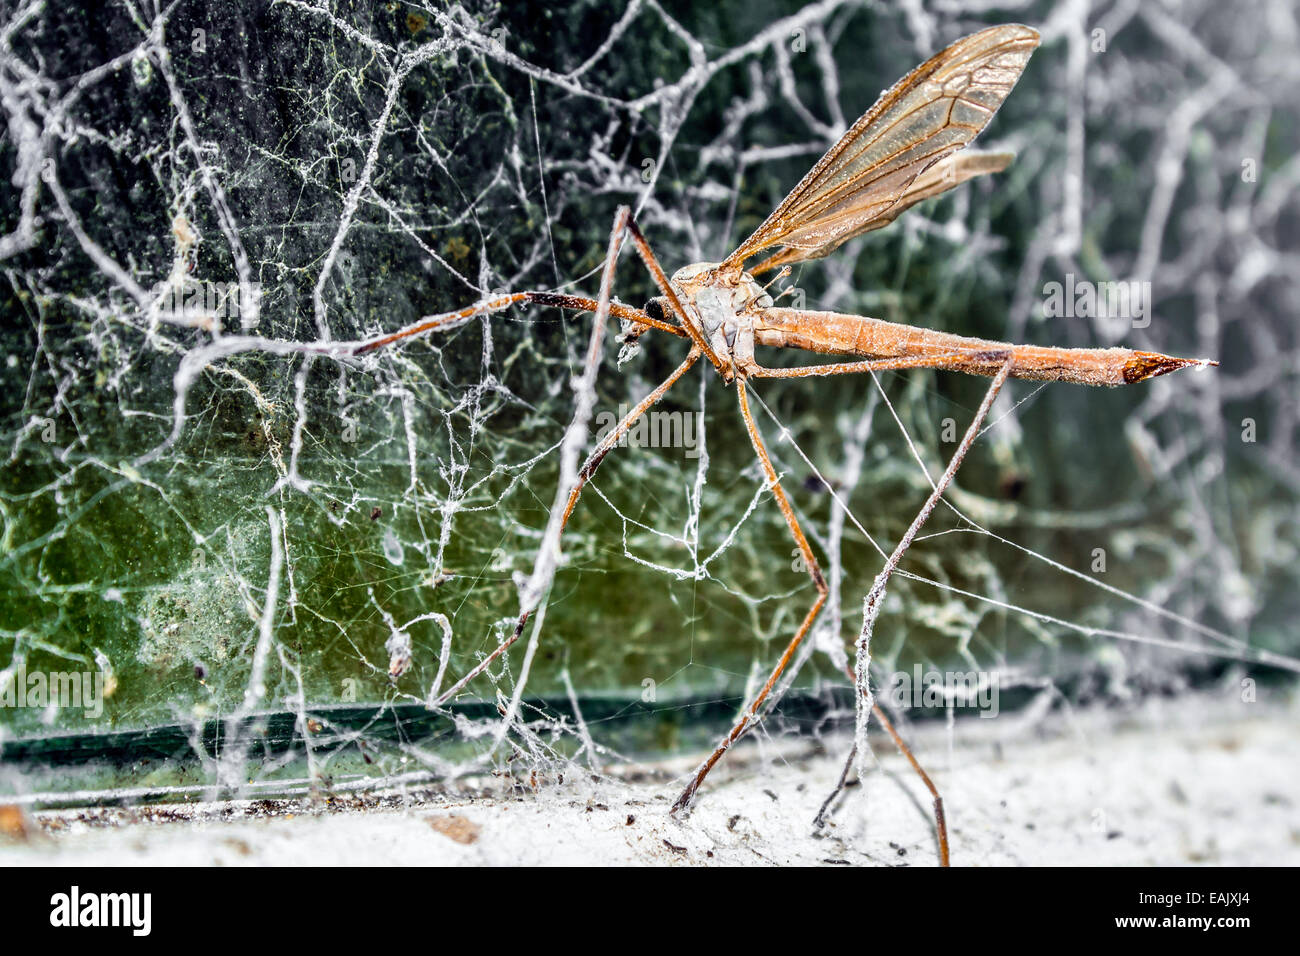 A large Crane Fly (family Tipulidae) Caught in a Web on a Window Stock Photo